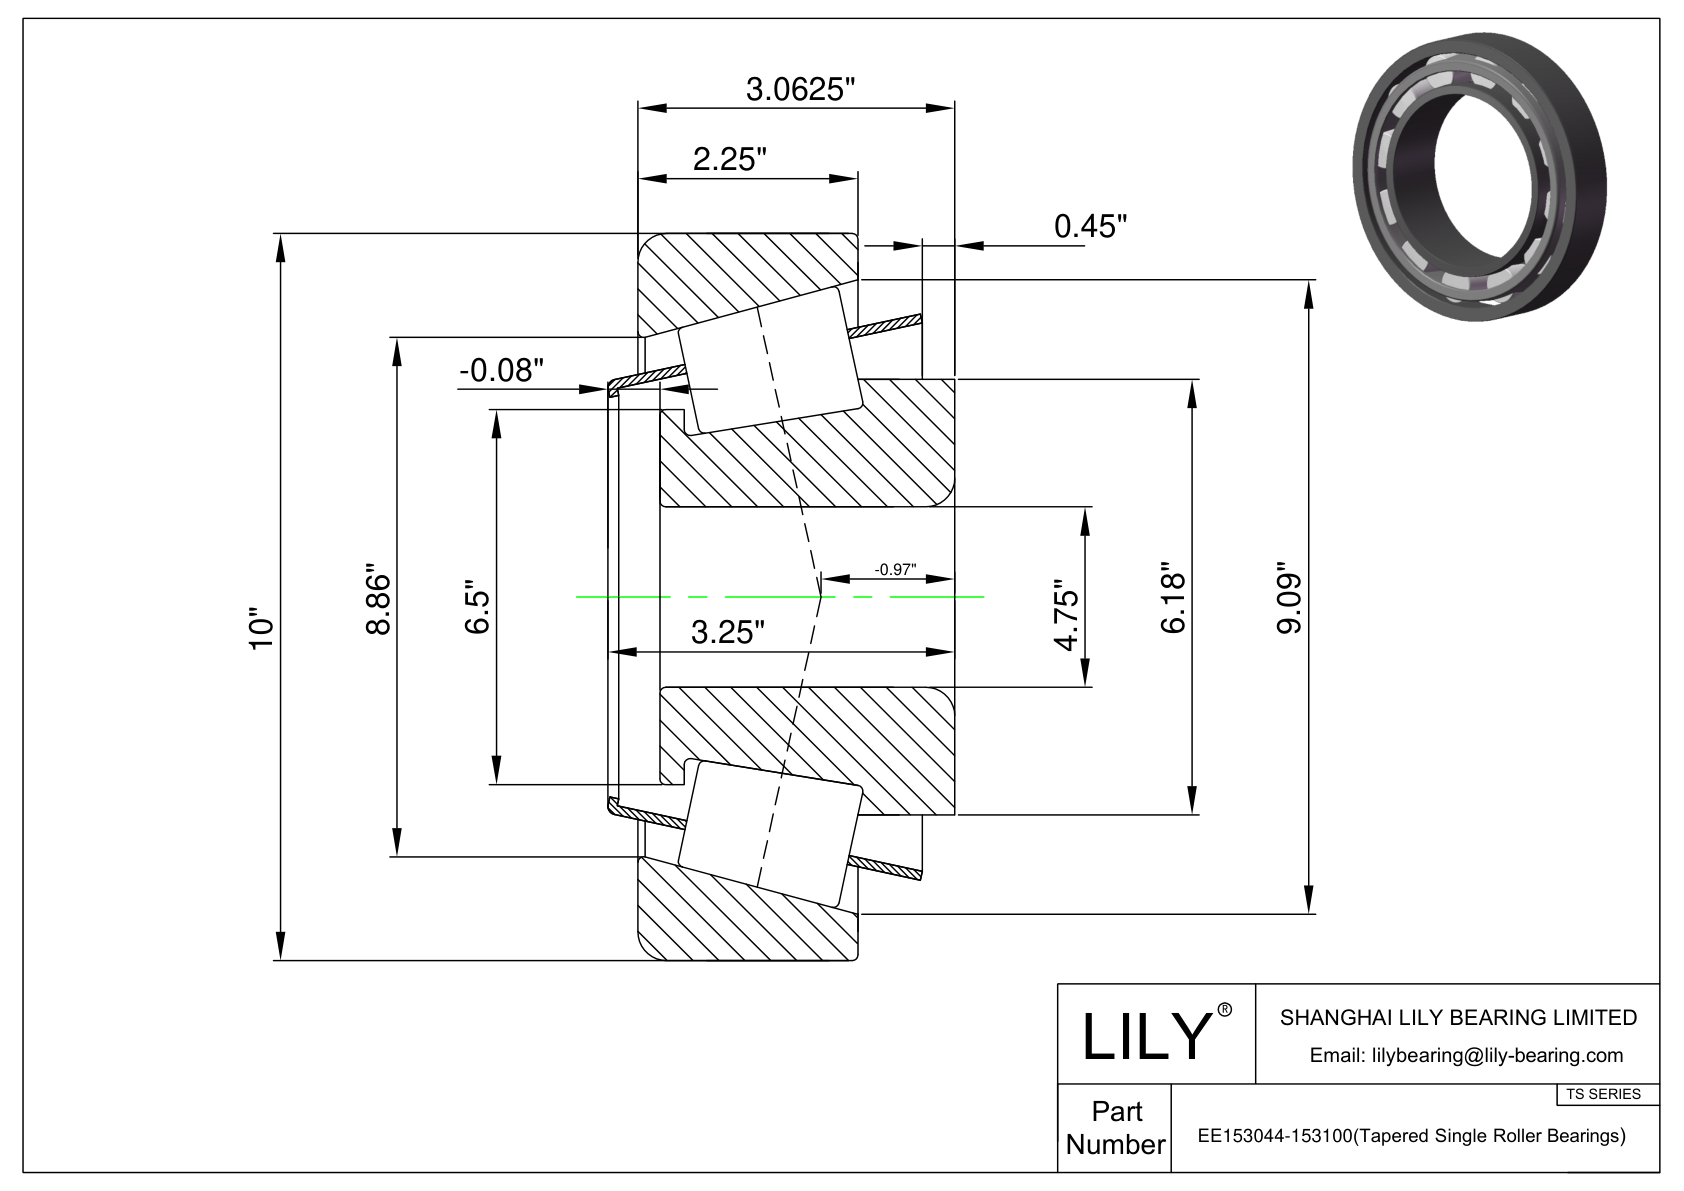 EE153044-153100 TS (Tapered Single Roller Bearings) (Imperial) cad drawing